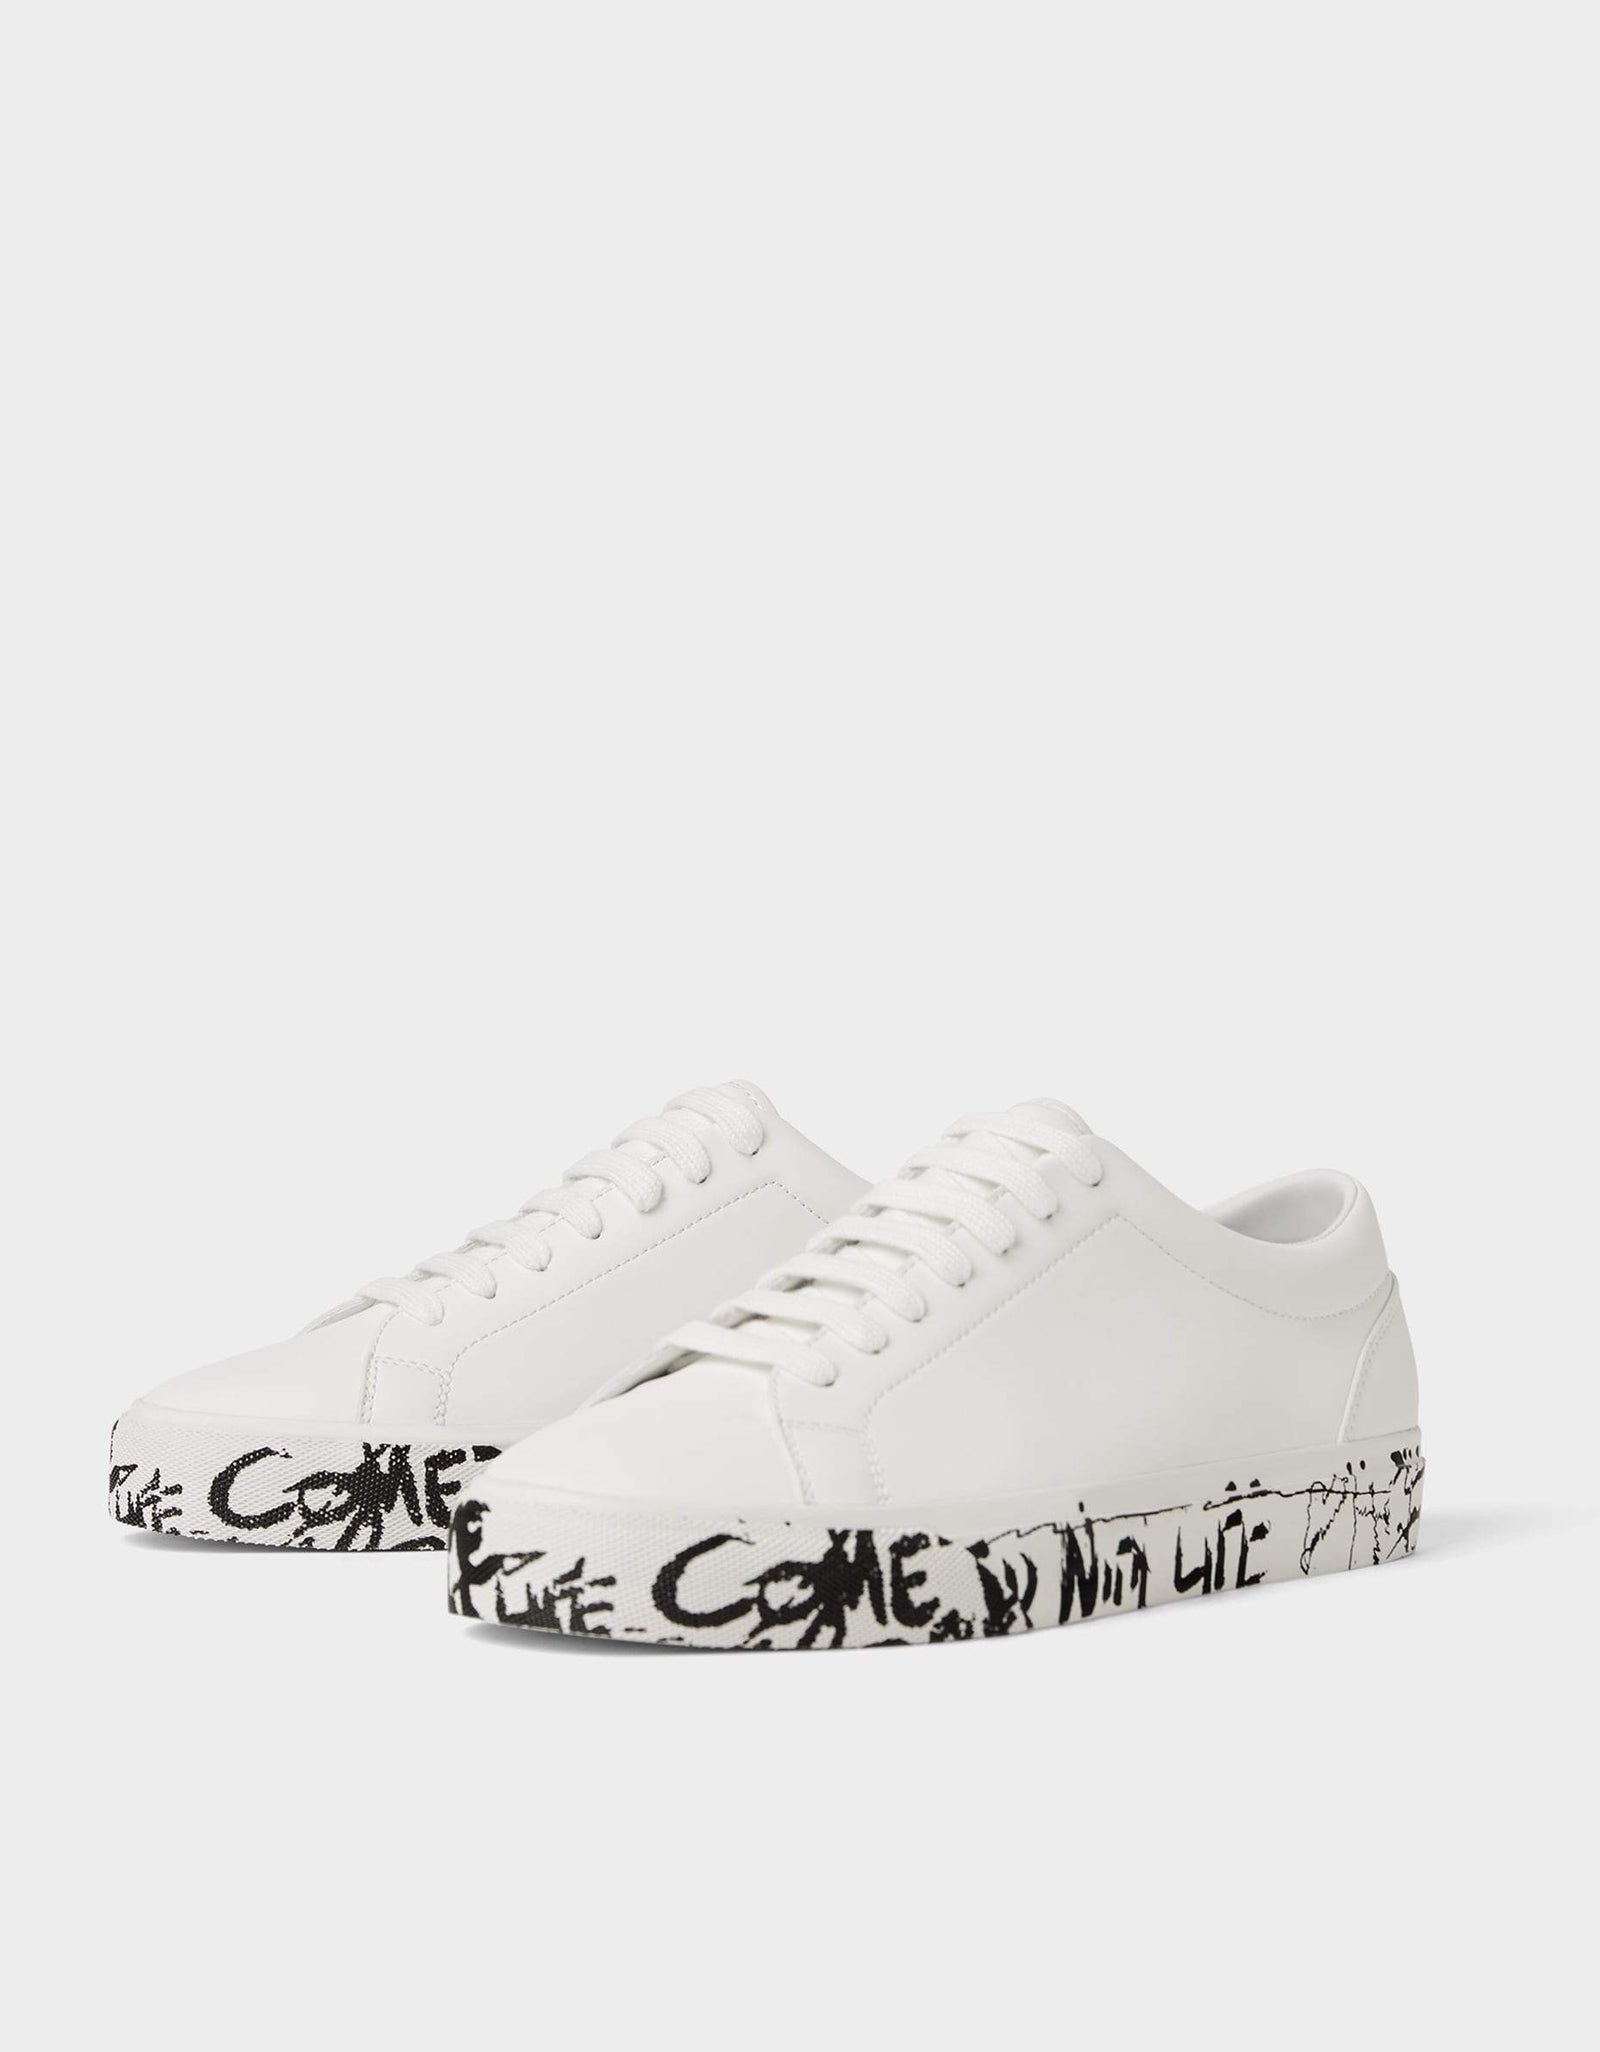 Embroidered white snakers